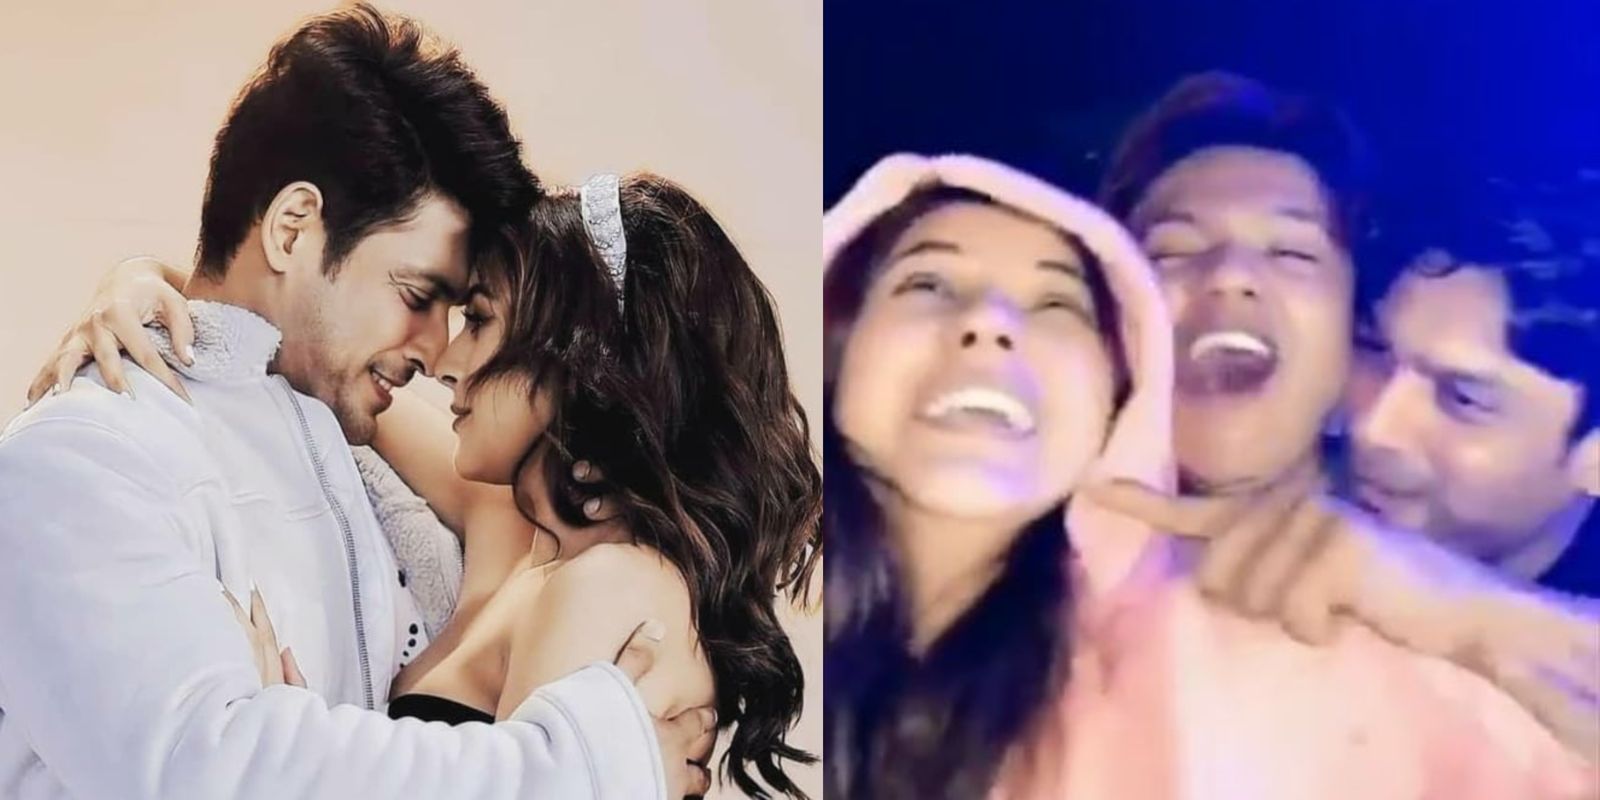 Bigg Boss 13 Cuties Sidharth Shukla-Shehnaaz Gill Are Partying In Goa And Their Video Is Making Us Go 'Aww'